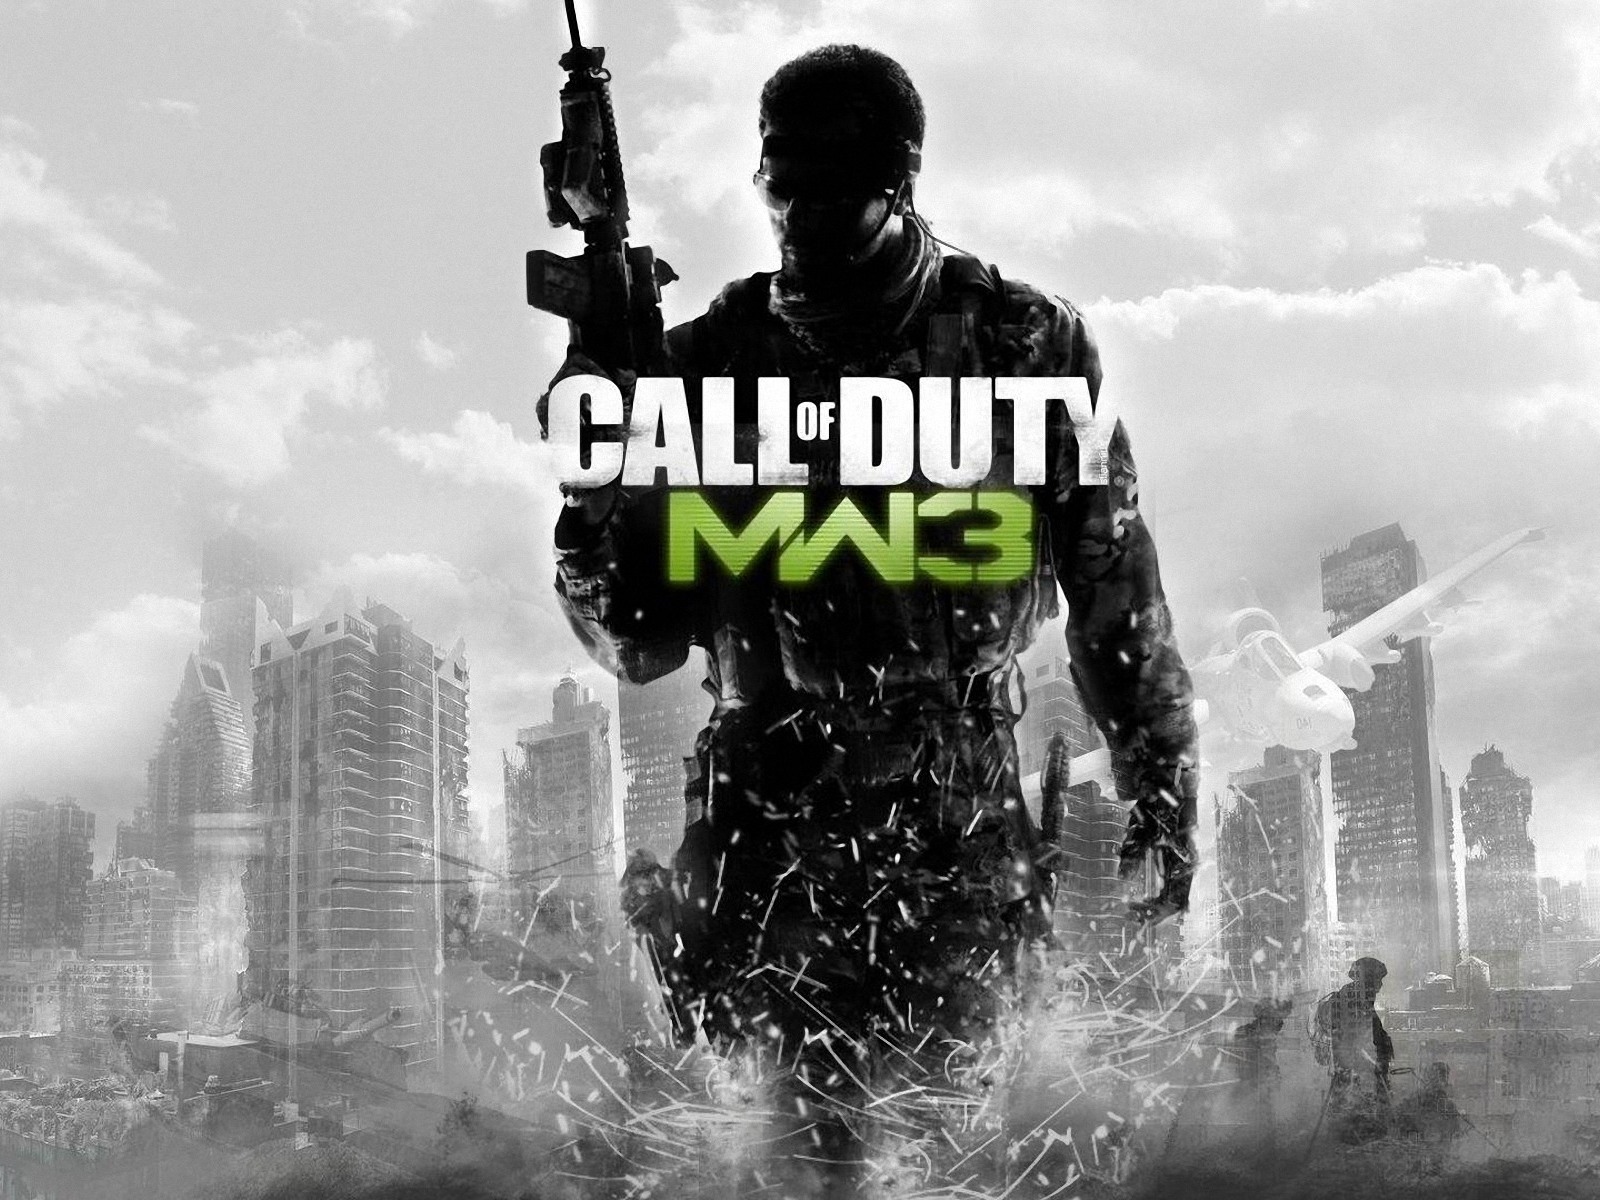 Call of Duty Modern Warfare 3 wallpapers Call of Duty Modern Warfare